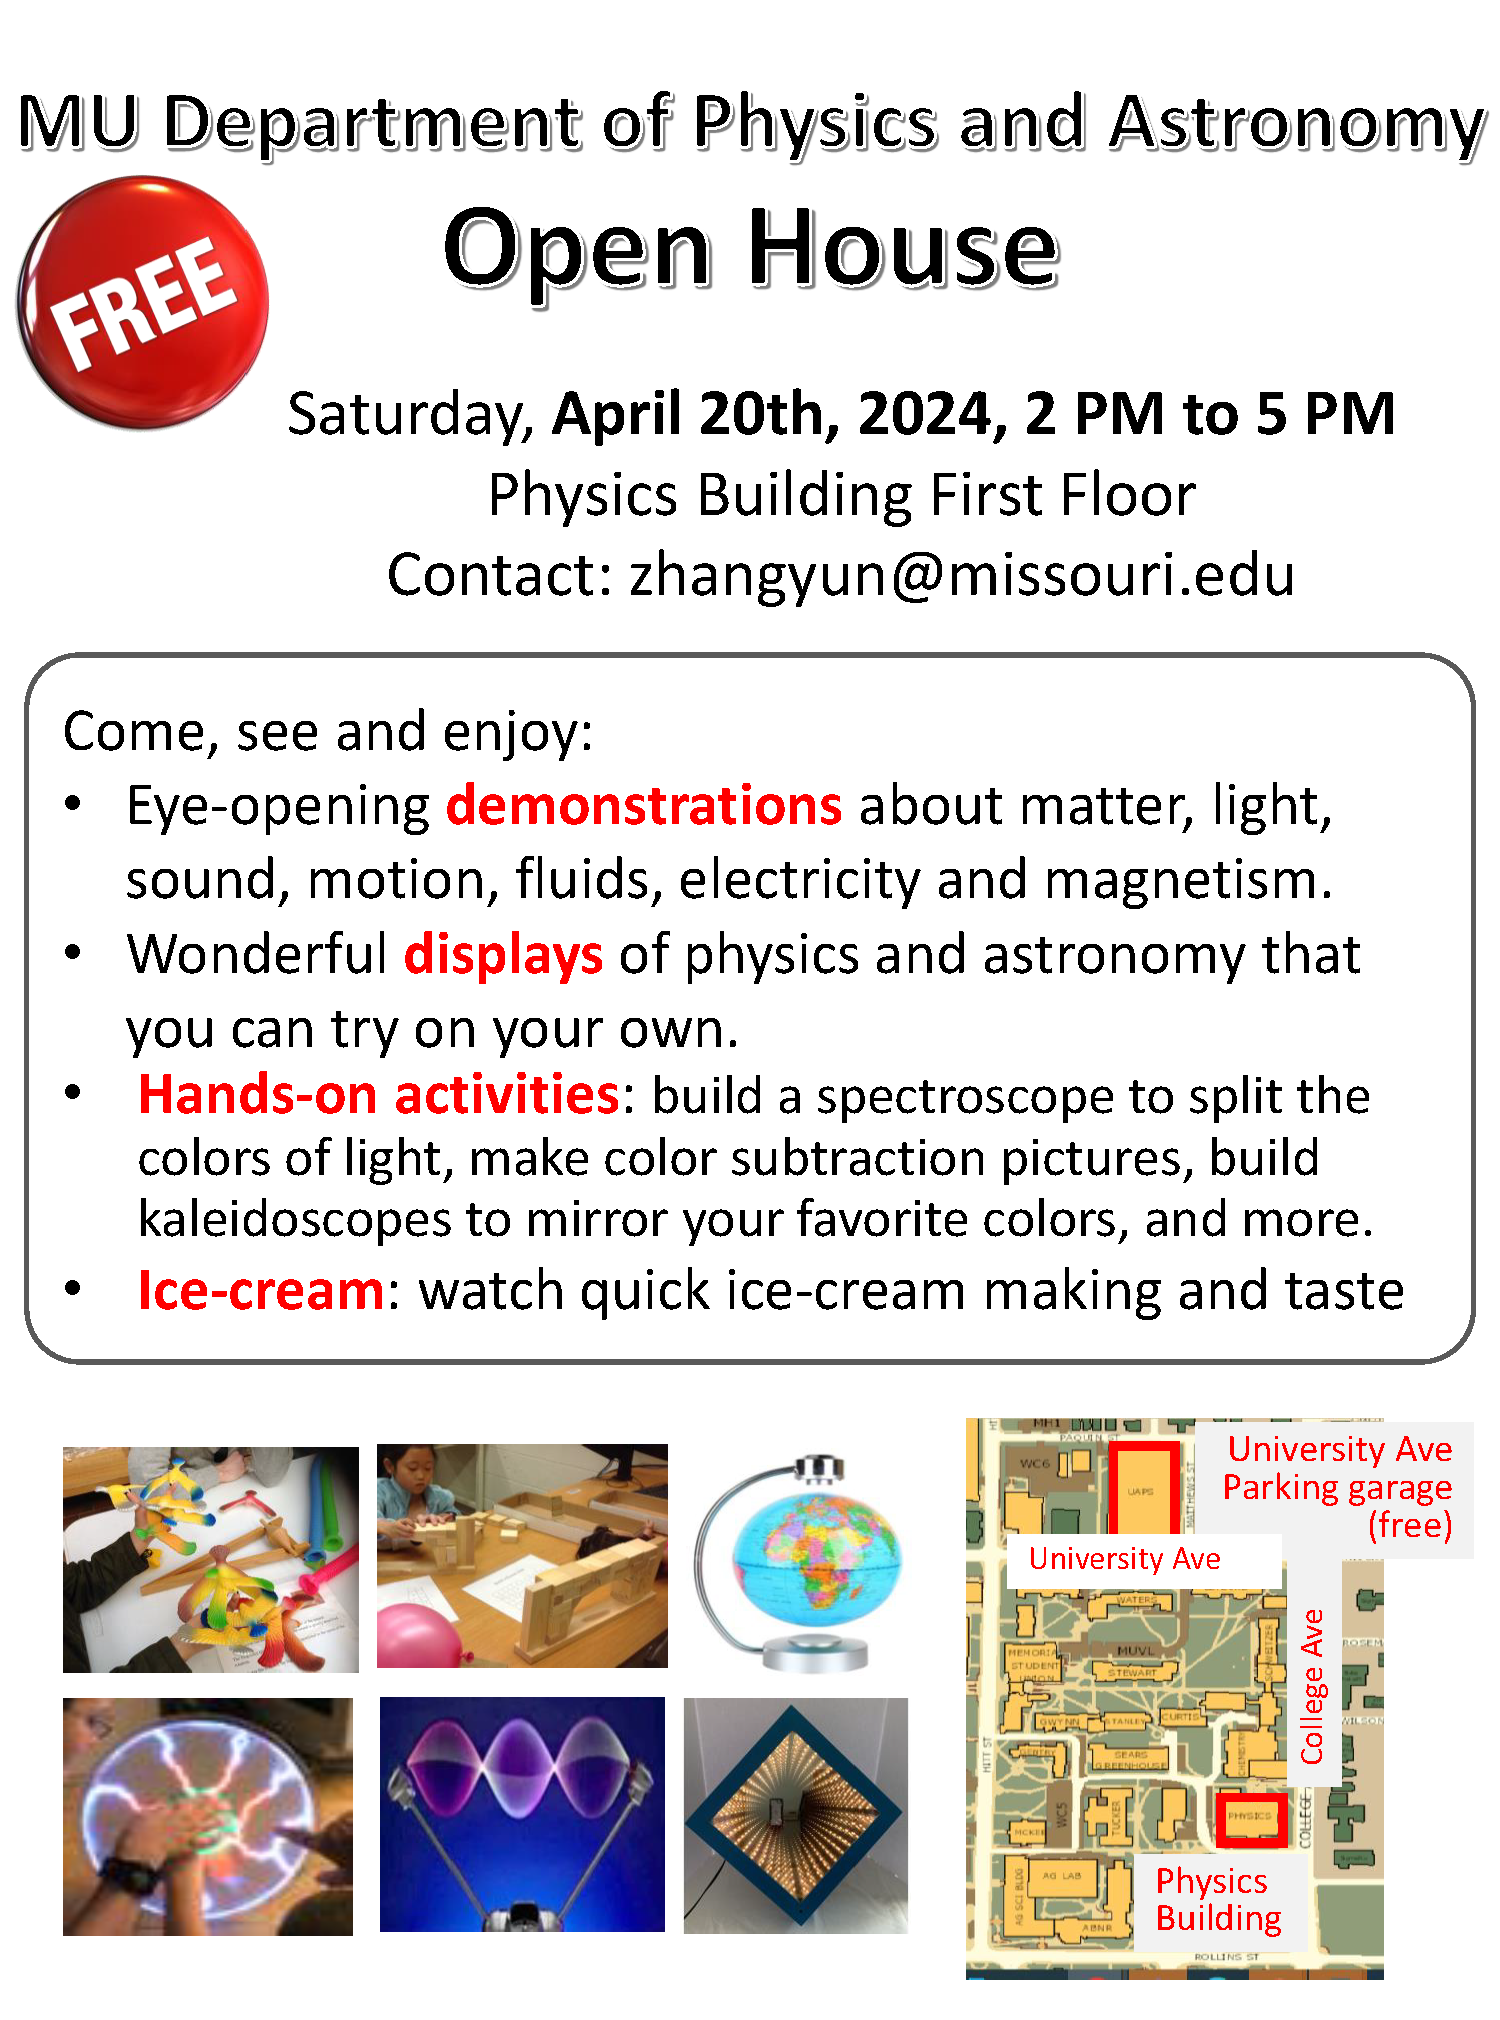 MU Department of Physics and Astronomy Open House Flyer April 20th, 2024